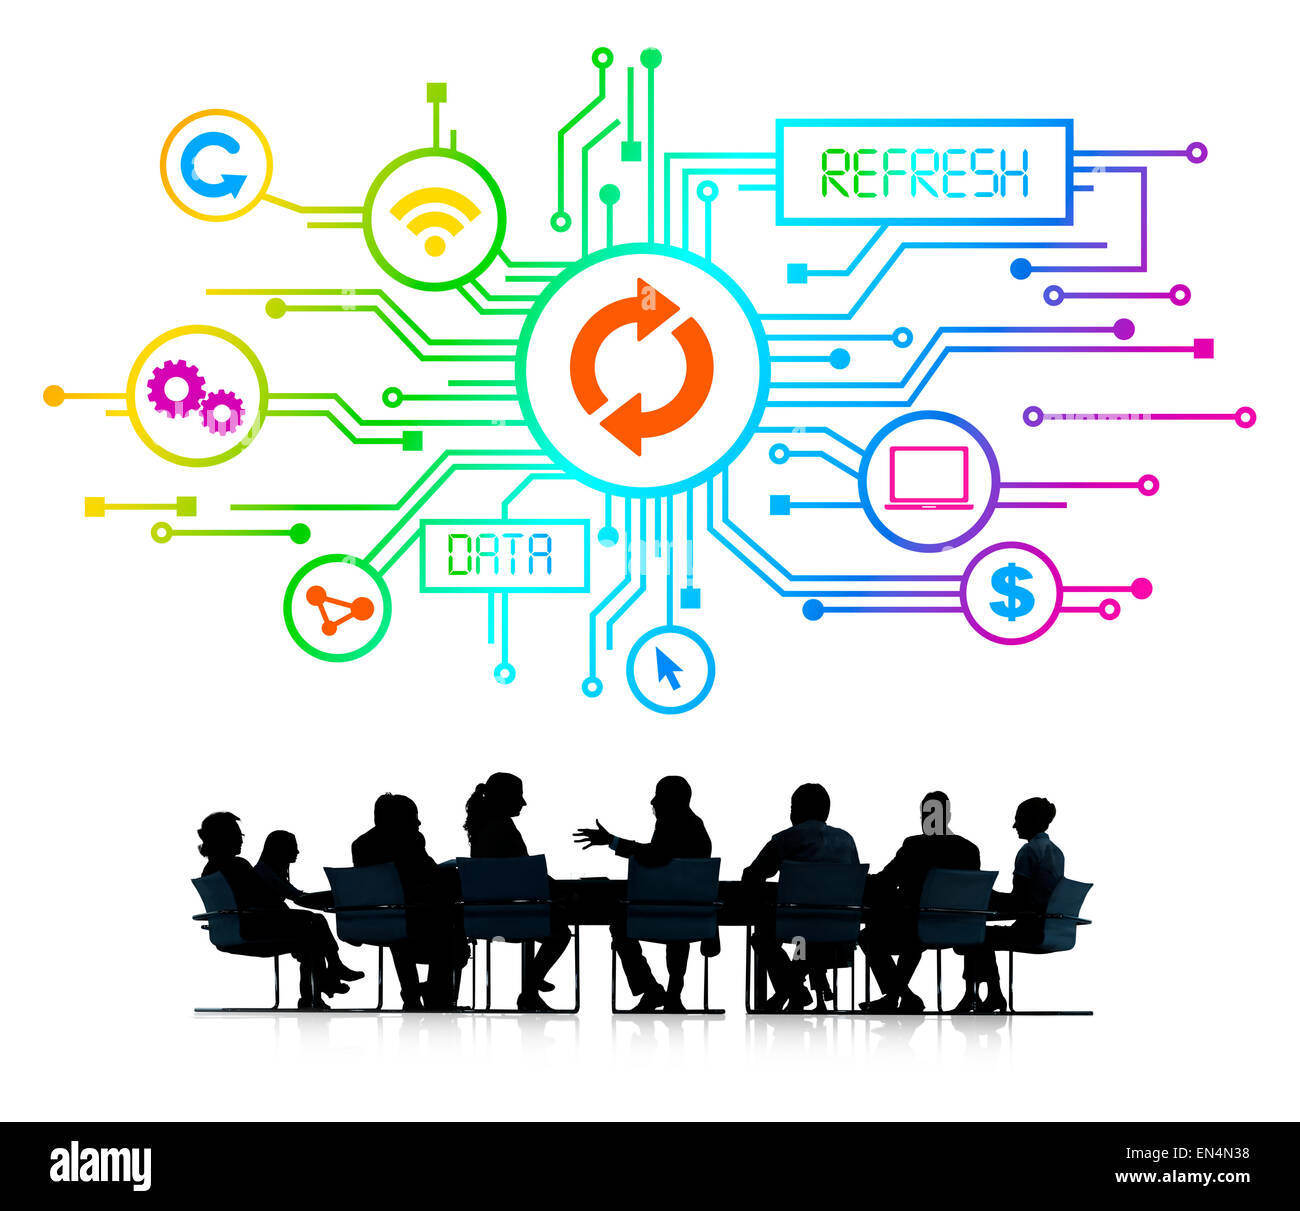 Silhouettes of Business People Having a Meeting and Computer Network Concept Stock Photo